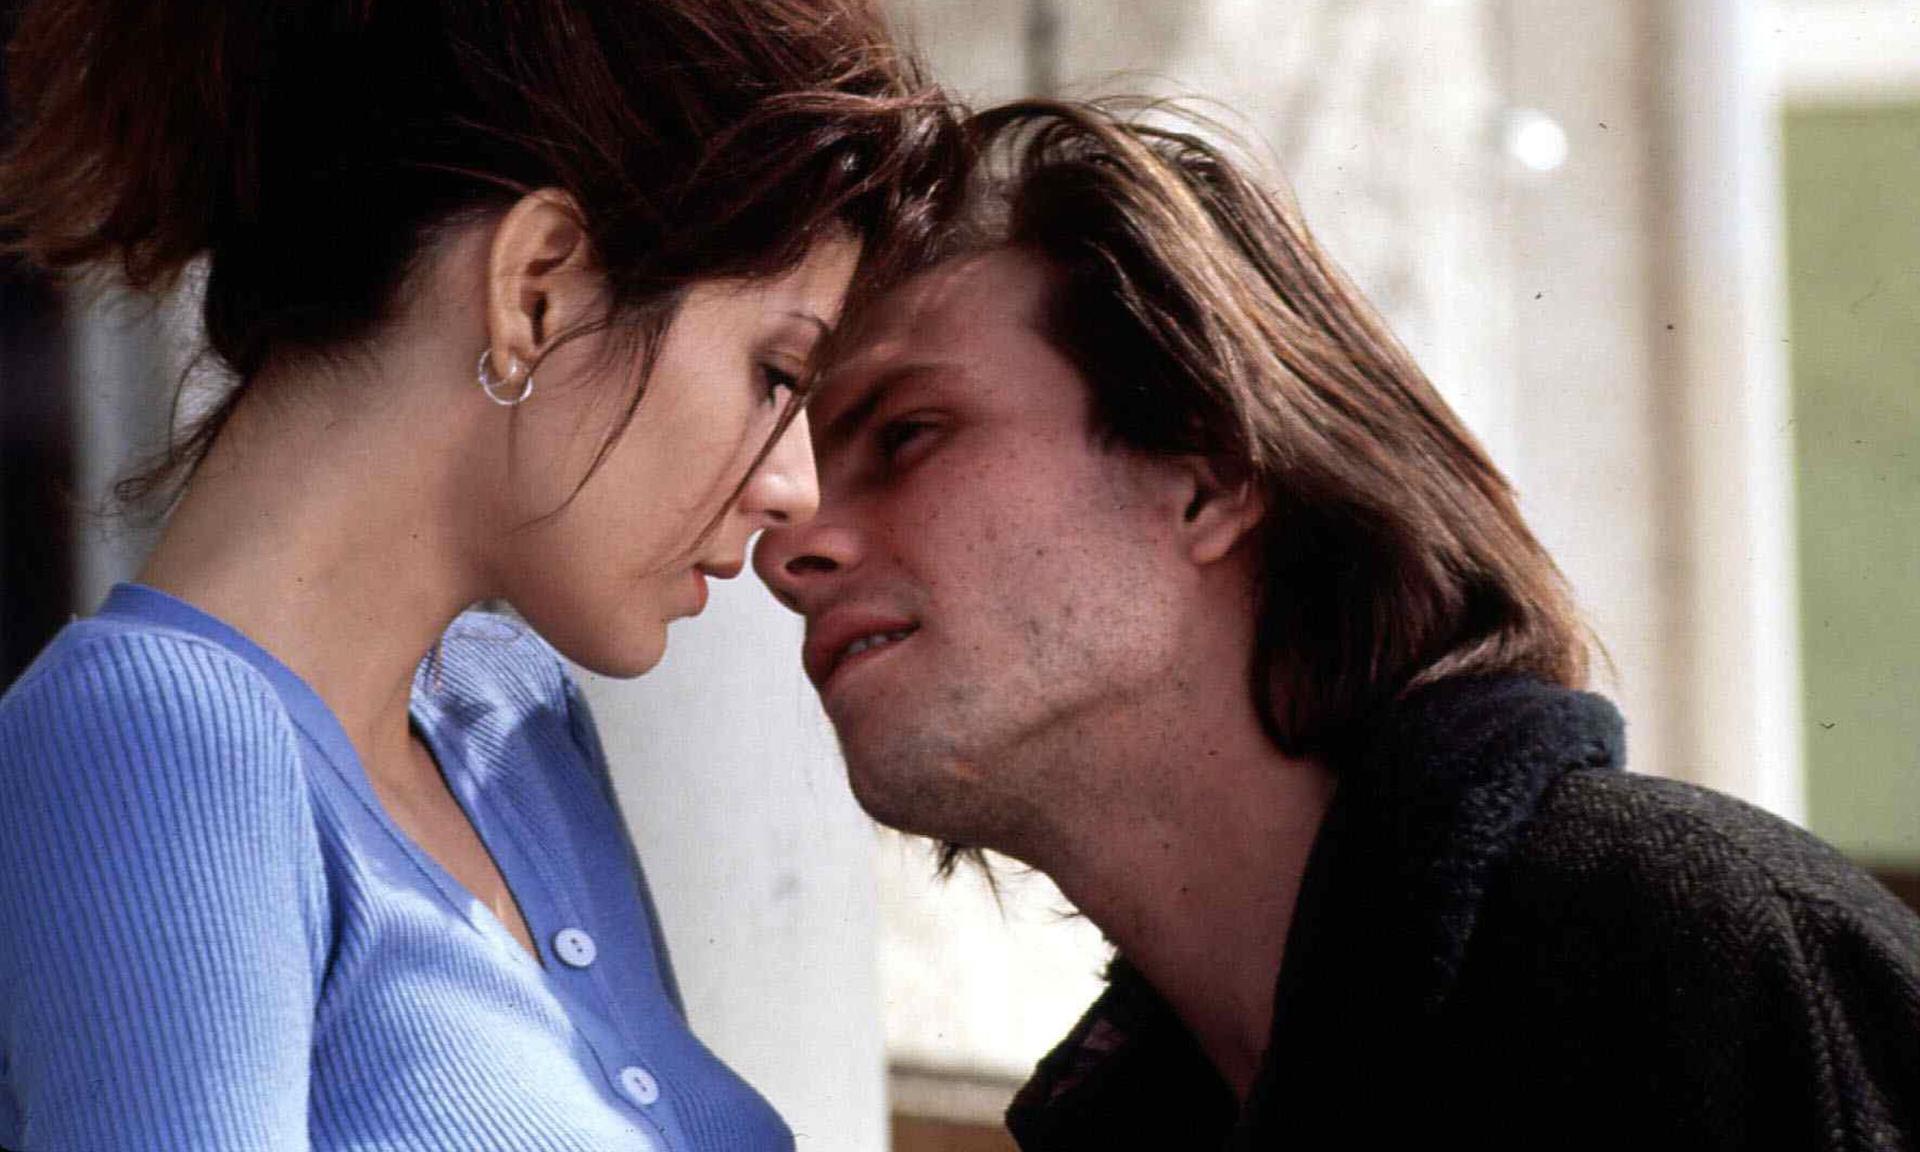 The 1993 romantic drama “Untamed Heart,” starring Marisa Tomei and Christian Slater.